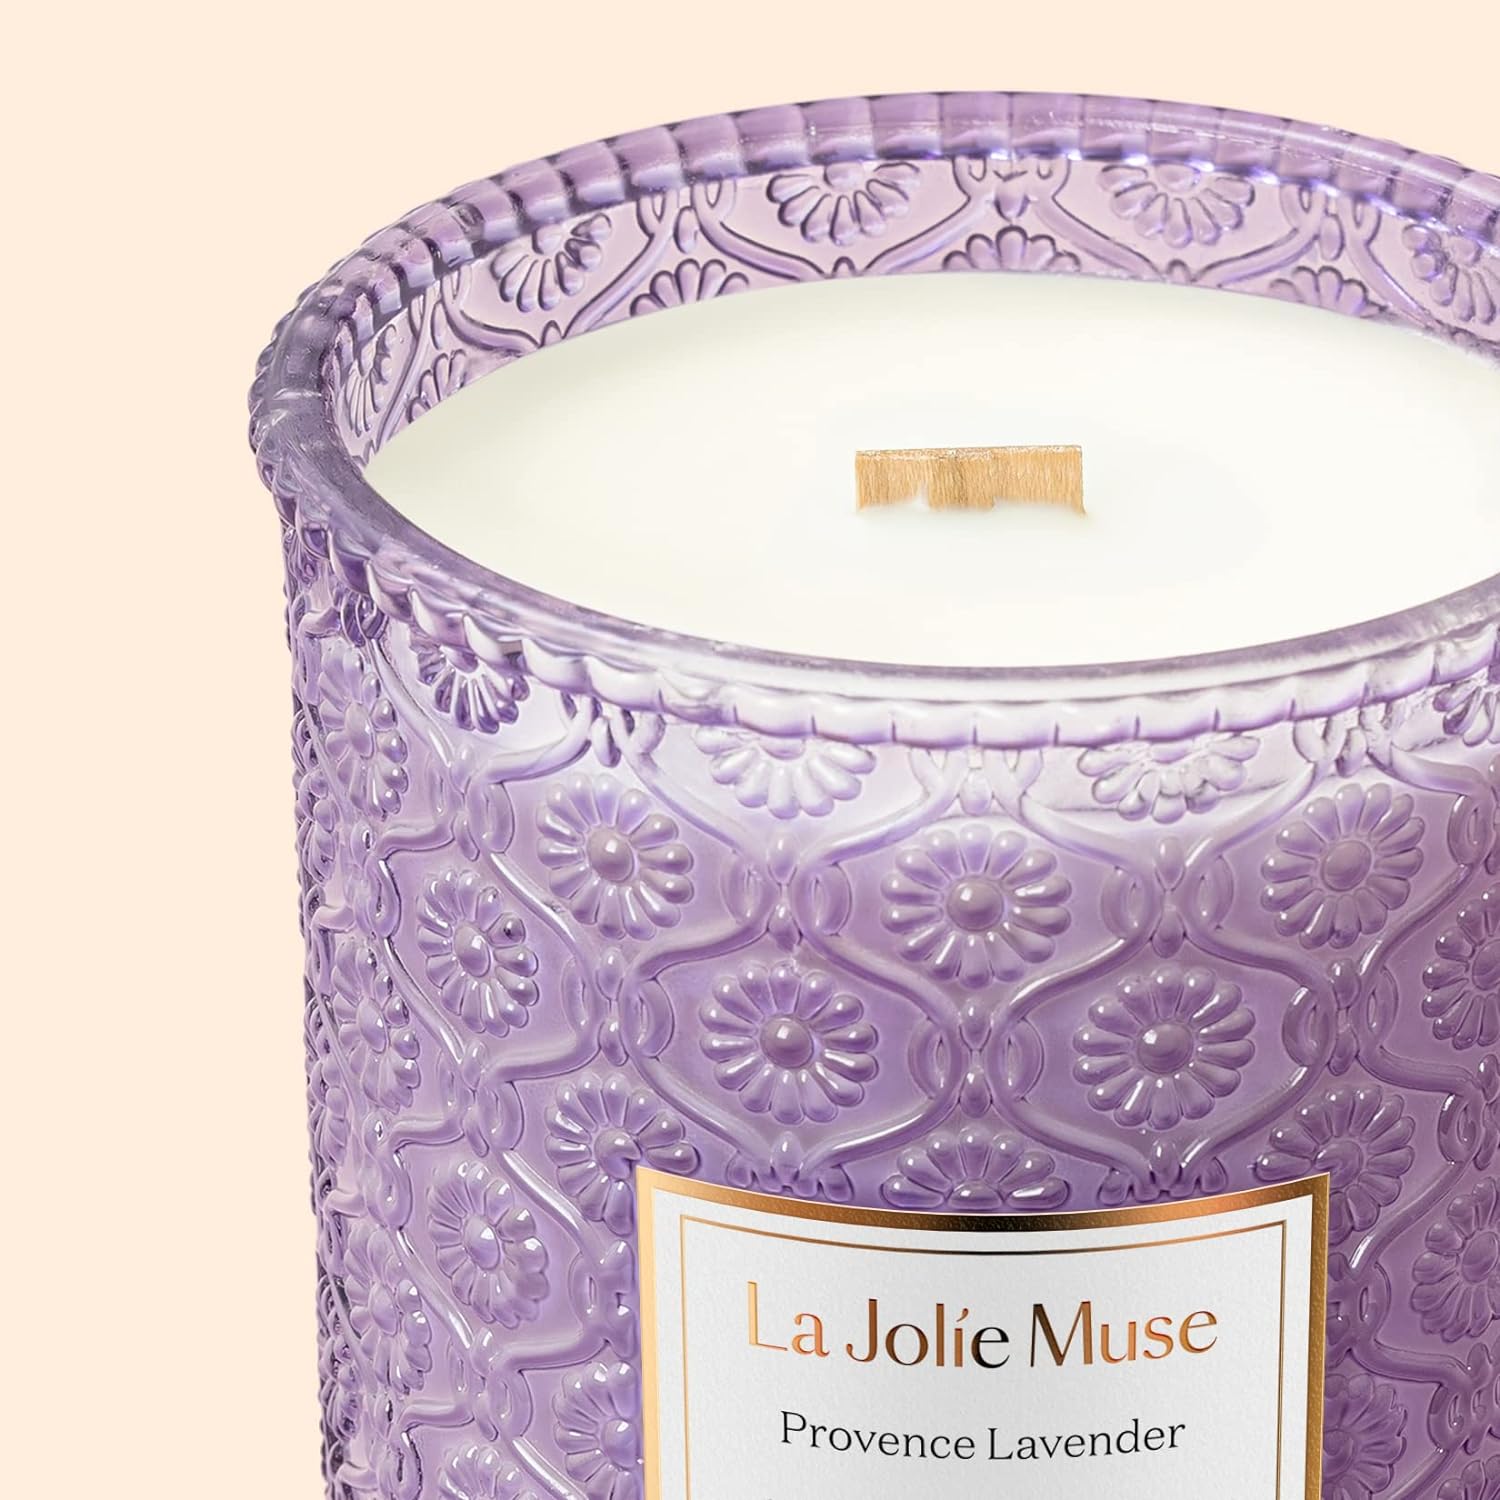 LA JOLIE MUSE Lavender Candle, Large Natural Soy Candle, 90 Hours Burning Time, Wood Wicked Candle, Aromatherapy Candle Gifts for Women, Luxury Candles for Home, Birthday Gift for Women